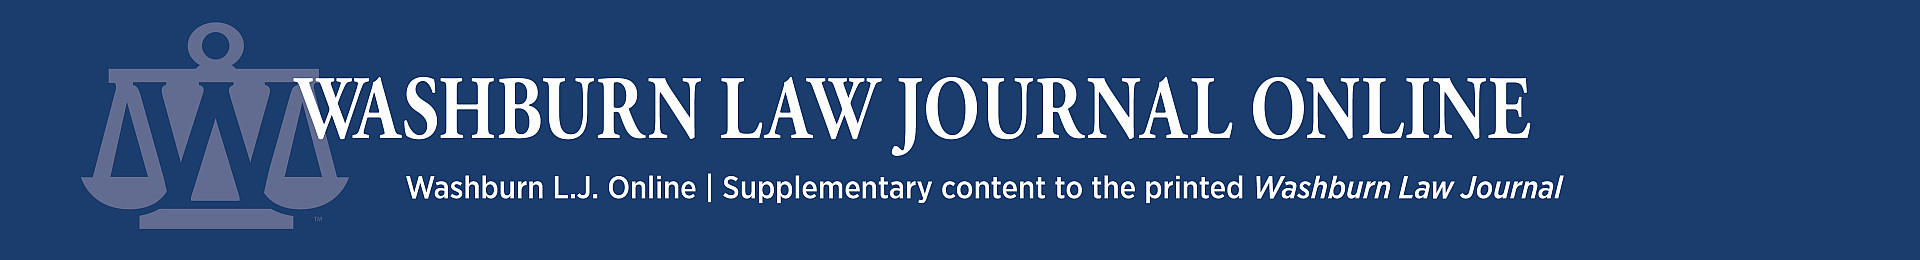 Graphic: Masthead for Washburn Law Journal (WLJ) Online.